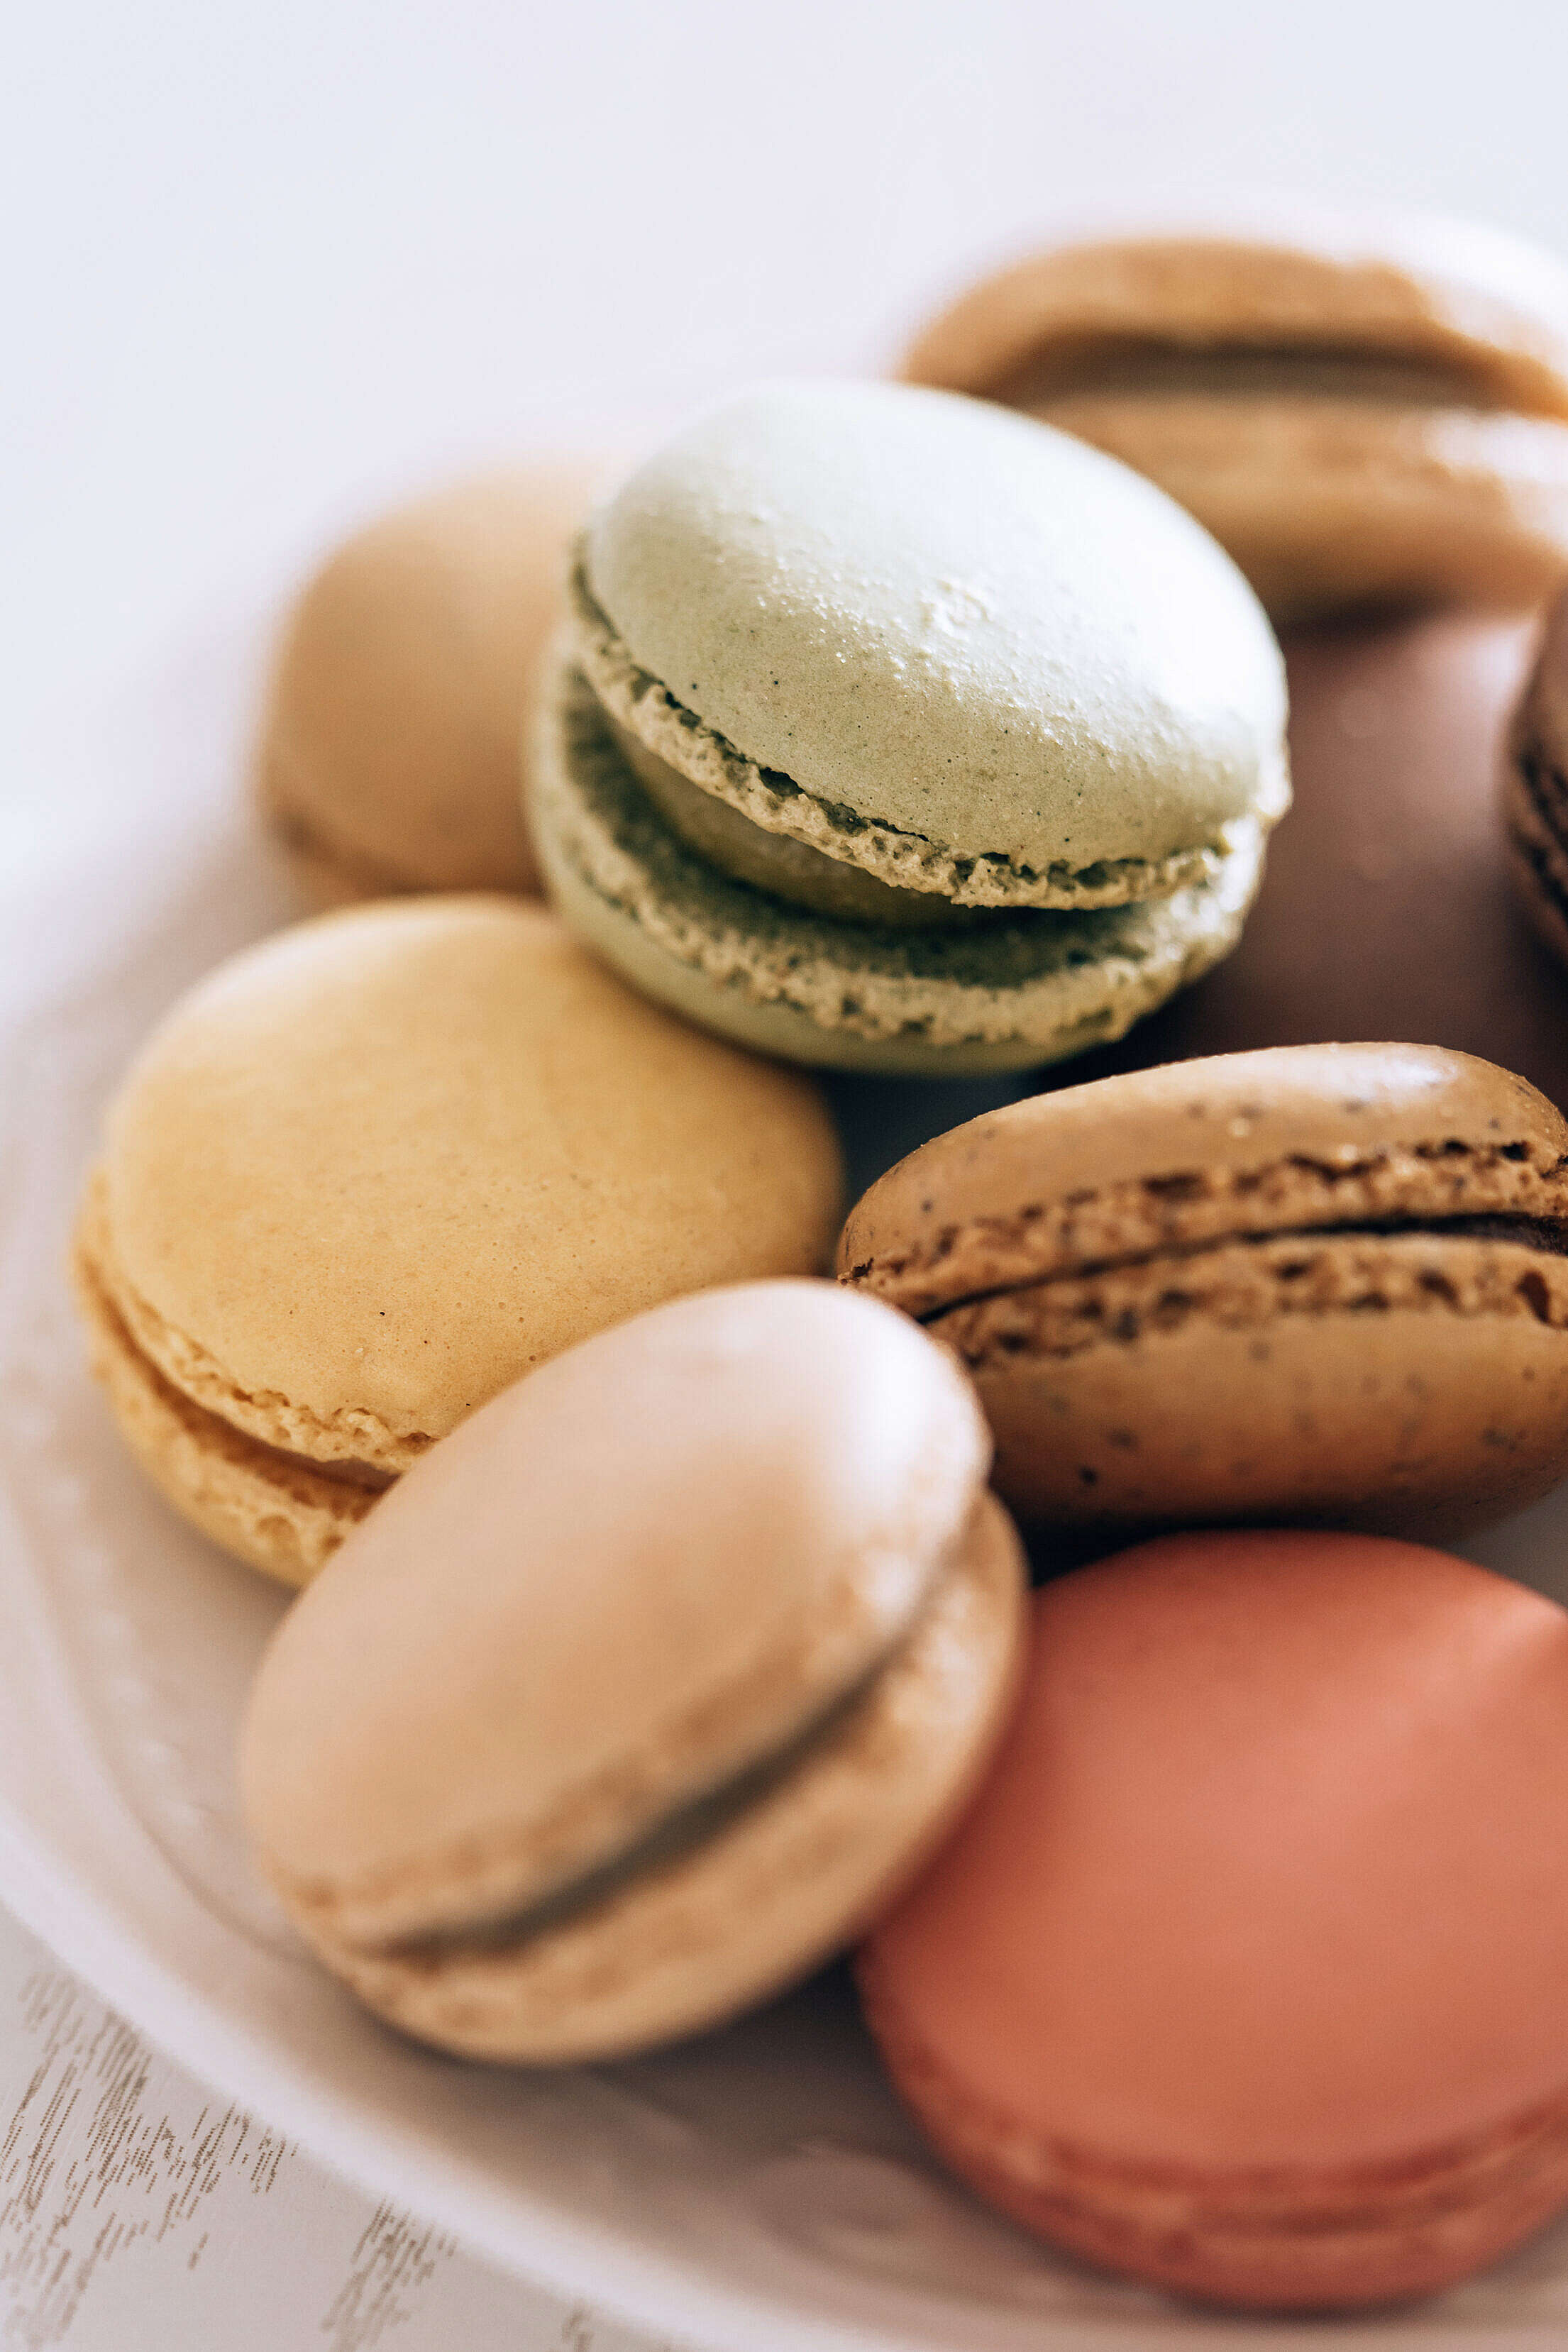 Delicious Homemade Macarons on a Plate Free Stock Photo